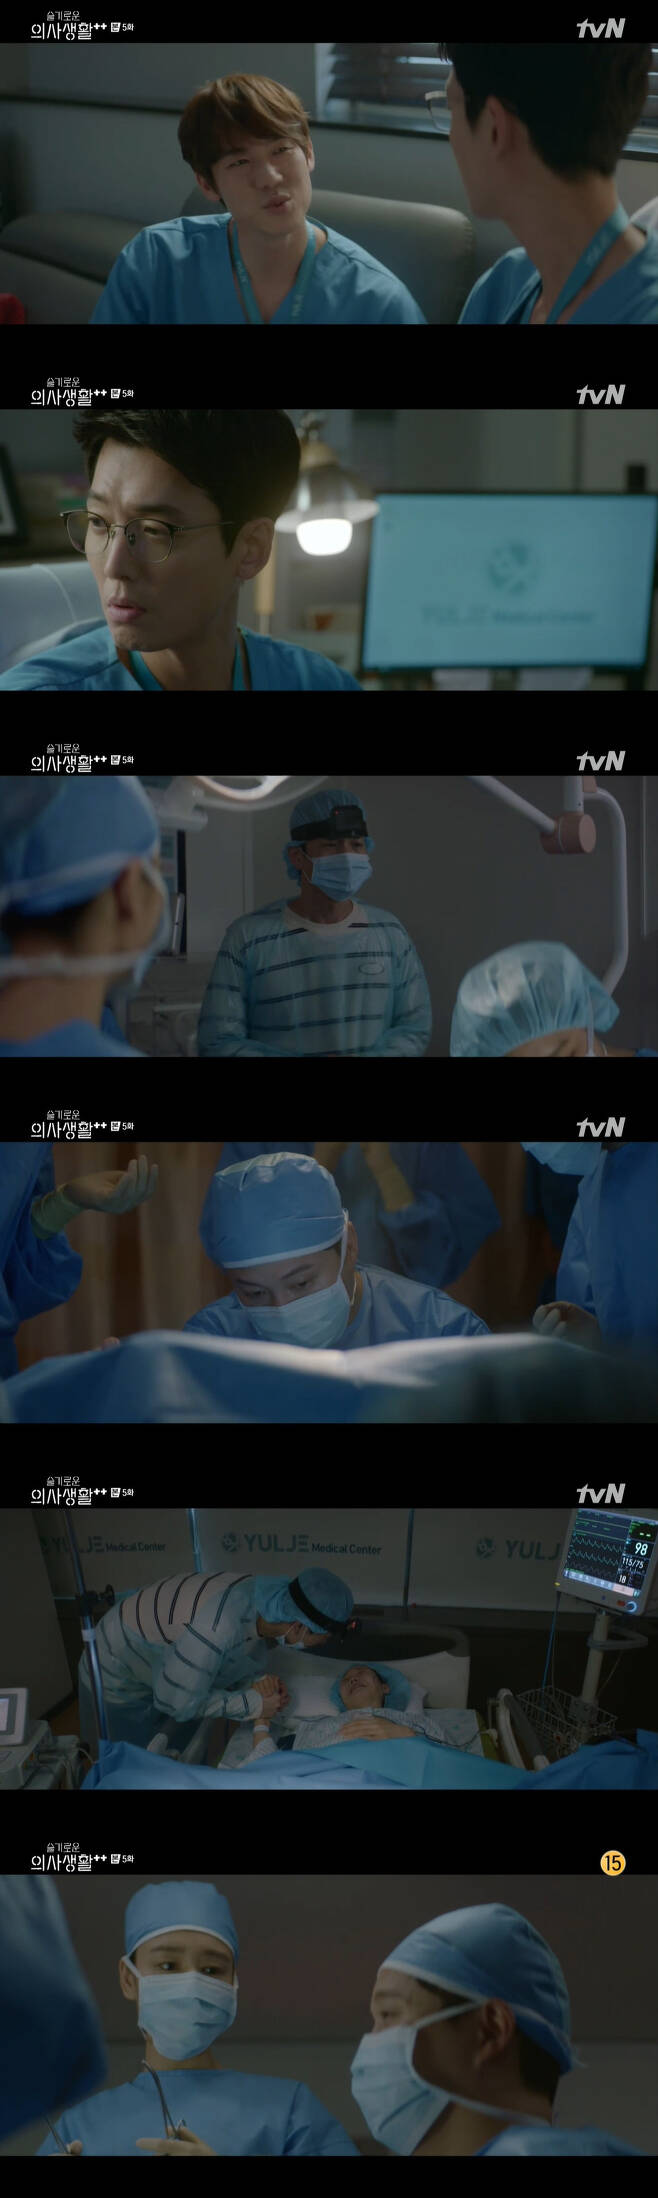 Sweetness 2.In TVNs Spicy Doctors Life Season 2 broadcast on the 15th, Lee Ik-jun (Jo Jung-suk) was shown to know between Lee Ik-soon (Kwak Sun-young) and Kim Joon-wan (Jung Kyung-ho).On this day, Lee said, I should never talk to Jun Wan, after telling Lee that he was sick.Lee Ik-jun, who returned home, recalled Lee Ik-sun, who said, Im sorry I didnt tell you. I started dating last summer.I do not know my brother, Jun Wan, who is sick, he said. I am sorry, he said.Chae Song-hwa (Jeonmido Boone) called his friends on an emergency call; Yang Seok-hyung (Kim Dae-myung Boone) said, Do you marry? and Chae Song-hwa said, Its as important as marriage.The boss of the sushi restaurant, who often goes to Sokcho, said if you need it, you will give it wholesale. I ordered 10, and when I arrived at Weekend, Seok-hyung asked me to send him home, it was fasting eight hours ago, Chae Song-hwa said, surprising 99s.Ahn Jung-won (Yoo Yeon-seok) had a date with a crab in the early winter (Shin Hyun-bin) and said, Please promise me one thing.If anything happens, whether its big or small, tell me everything, he said. I do not know, but I will not nag you.Then, in the winter, Professor promise me, he said, I would like you to express your affection once in Haru.An Jeong-won smiled brightly, and the two kissed and showed their affection.Yang Seok-hyung (Kim Dae-myung) smiled when she saw her husband taking his wife first rather than her child after giving birth.I realized that marriage is not just a bad thing, Yang said to Chae Song-hwa, who came to him. I went to my wife before the baby.I felt good and envious all the time.Chae Song-hwa said, Remarry. Yang Seok-hyung said, I should not marry. Do not you know my house? Chae Song-hwa said, What did you do? What did you do?Yang Seok-hyung said, Shin Ae was stressed by a coma before marriage, and after marriage, her mother called Haru 30 times.I wanted to get in trouble, so I said I was going to study abroad, but I was asked why I had my daughter study with my sons money. I was depressed and I thought it was a good idea to stay in my family, but it was not good, he said. I went home to be a daughter-in-law, but I saw her taking a ring from her dressing table.I thought it was best to pretend not to know. Its not an effort, its an avoidance. Its an effort to ask why you stole it and fight it, Chae said. Ill give you a solution. Say a lot.Even if you have a useless word, it will not be useless, he said. Start with the closest person, the person you think most comfortably.At that time, a call came to Chu Min-ha (Ahn Eun-jin), and Yang Seok-hyung continued the story as Chae Song-hwa advised.Meanwhile, Lee Ik-jun waited while Lee Ik-sun returned to Korea for the inspection and headed for Changwon together. While Lee Ik-jun was away for a while, Lee Ik-sun waited alone in the car.Kim Joon-wan, who did not come to the hospital earlier, headed to the hospital because of work, and when he saw Lees car, he headed to the car.Lee Ik-sun, who watched this, shed tears, and at that moment Kim Joon-wan headed to the hospital at the call of Do Jae-hak (Jung Mun-sung).Chu Min-ah also said, Lets ask where you are going to department store. Its not like that. But its 100% green light to ask me that.I have a question from the professor, and I can do Confessions five times in the future, he said. I think you can let me do it if you do not feel uncomfortable.Yang Seok-hyung said, I do not feel uncomfortable, but I will refuse.I did not even have Confessions, but what if I refuse, he said. Can I make Confessions?Yang Seok-hyung said, It is free to do, and Chu Min-ha said, I will only be Confessions five times in the future. I like Professor a lot.Would you like to go to a movie in Weekend? But Yang Seok-hyung said, I decided to go to the temple with my mother in Weekend.